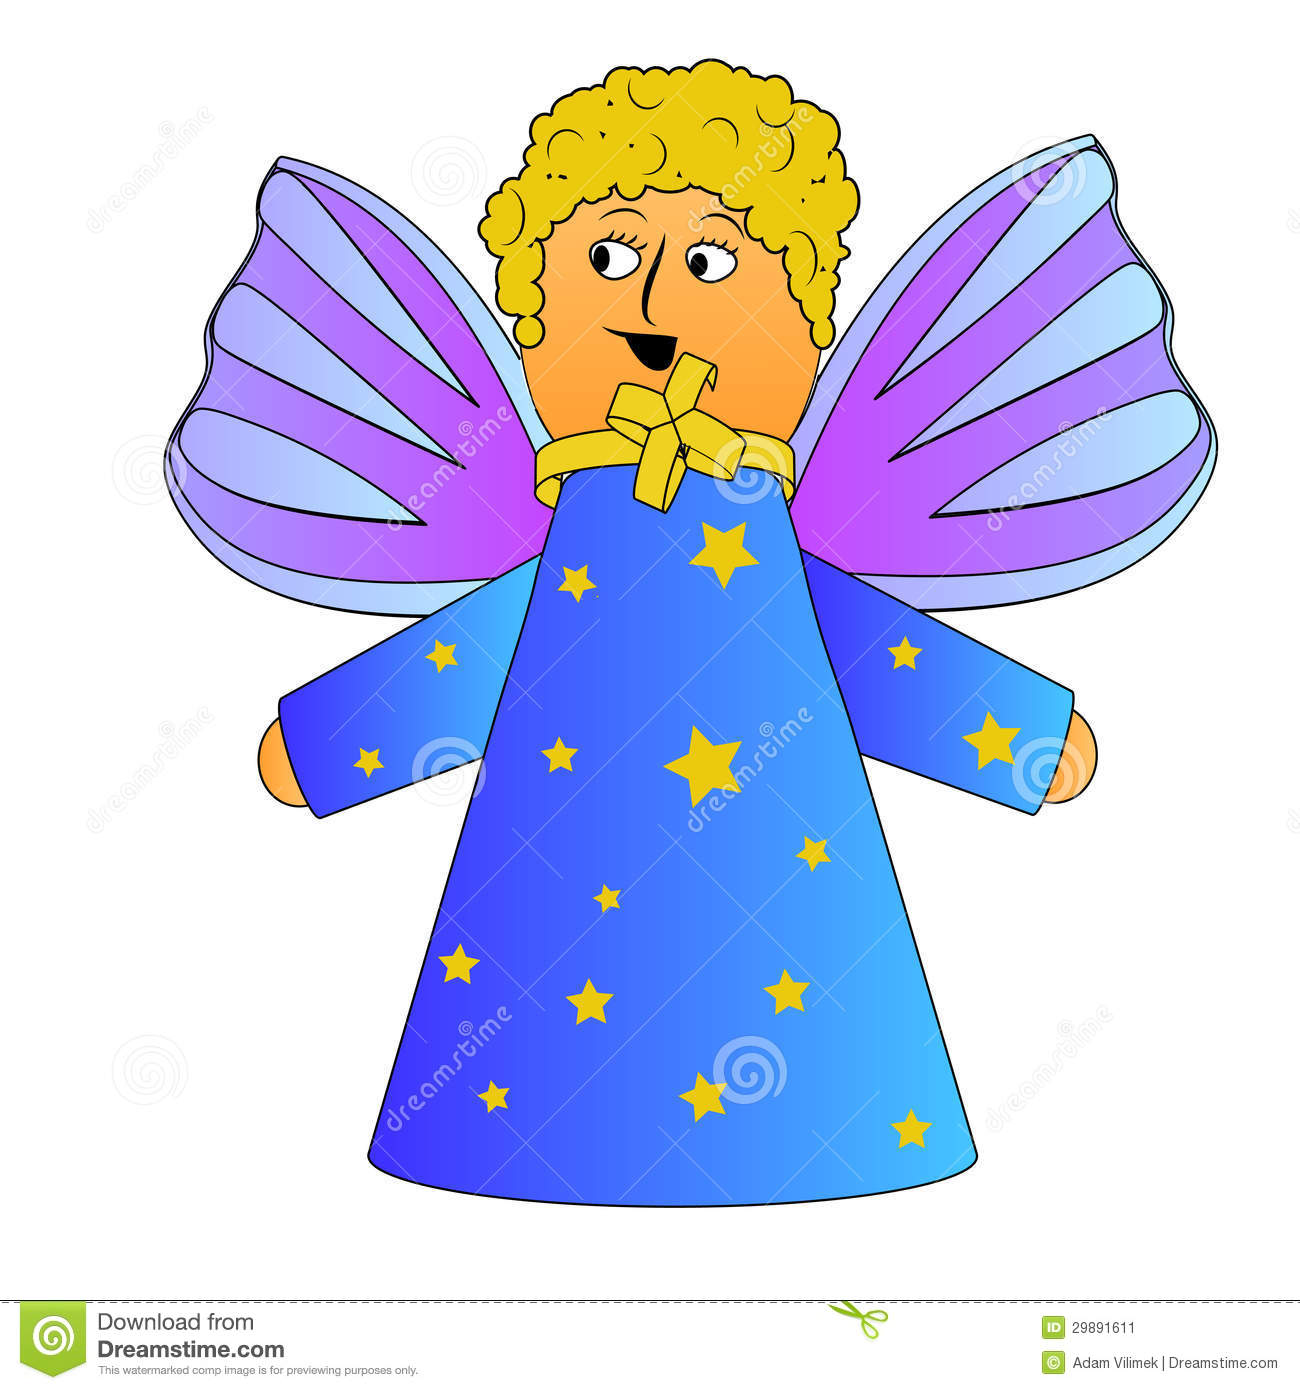 Cartoon Angel With Curly Hairs Vector Stock Image   Image  29891611